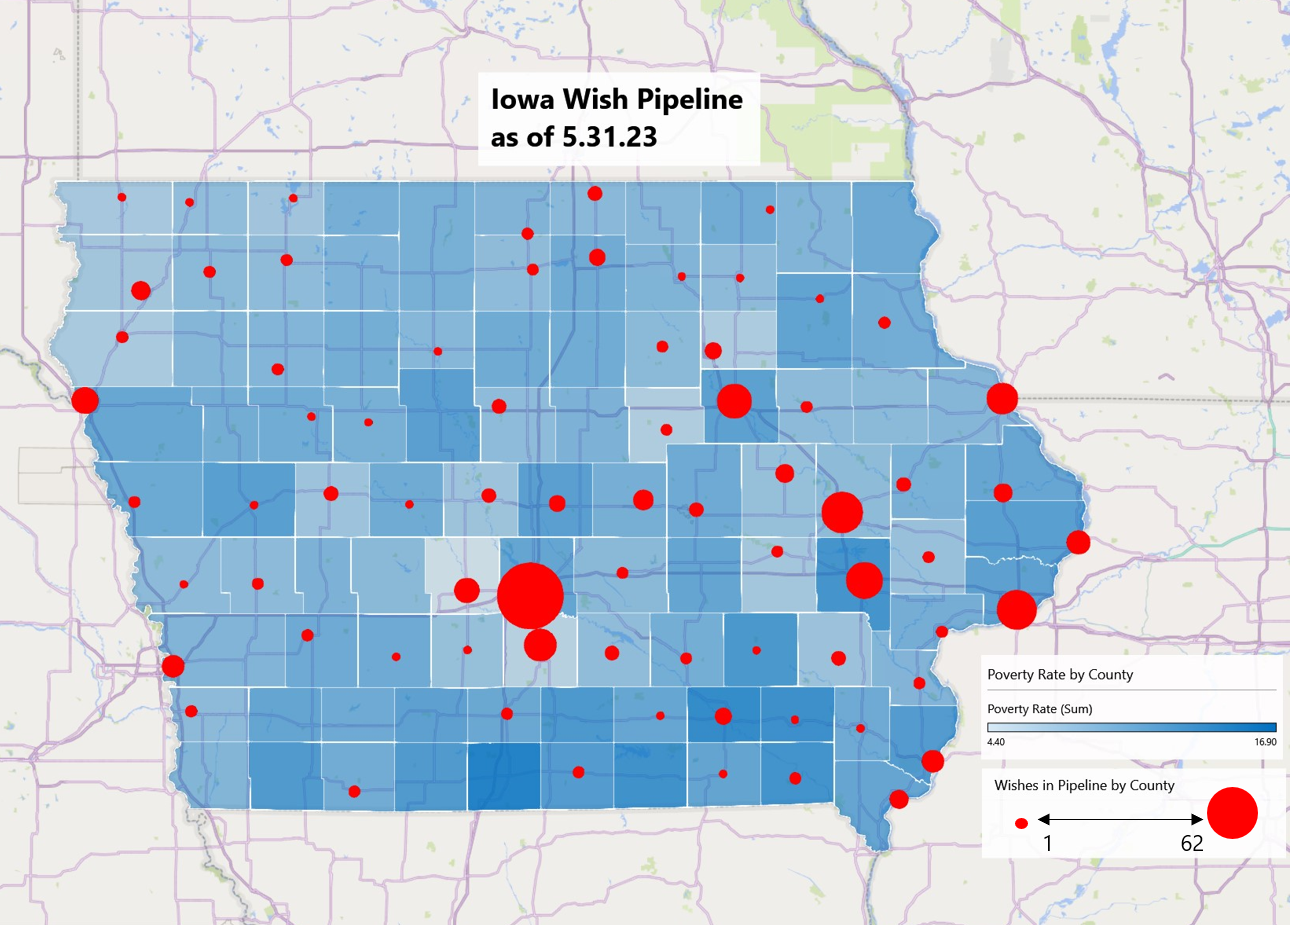 heat map of Make-A-Wish Iowa wish pipeline as of May 2023